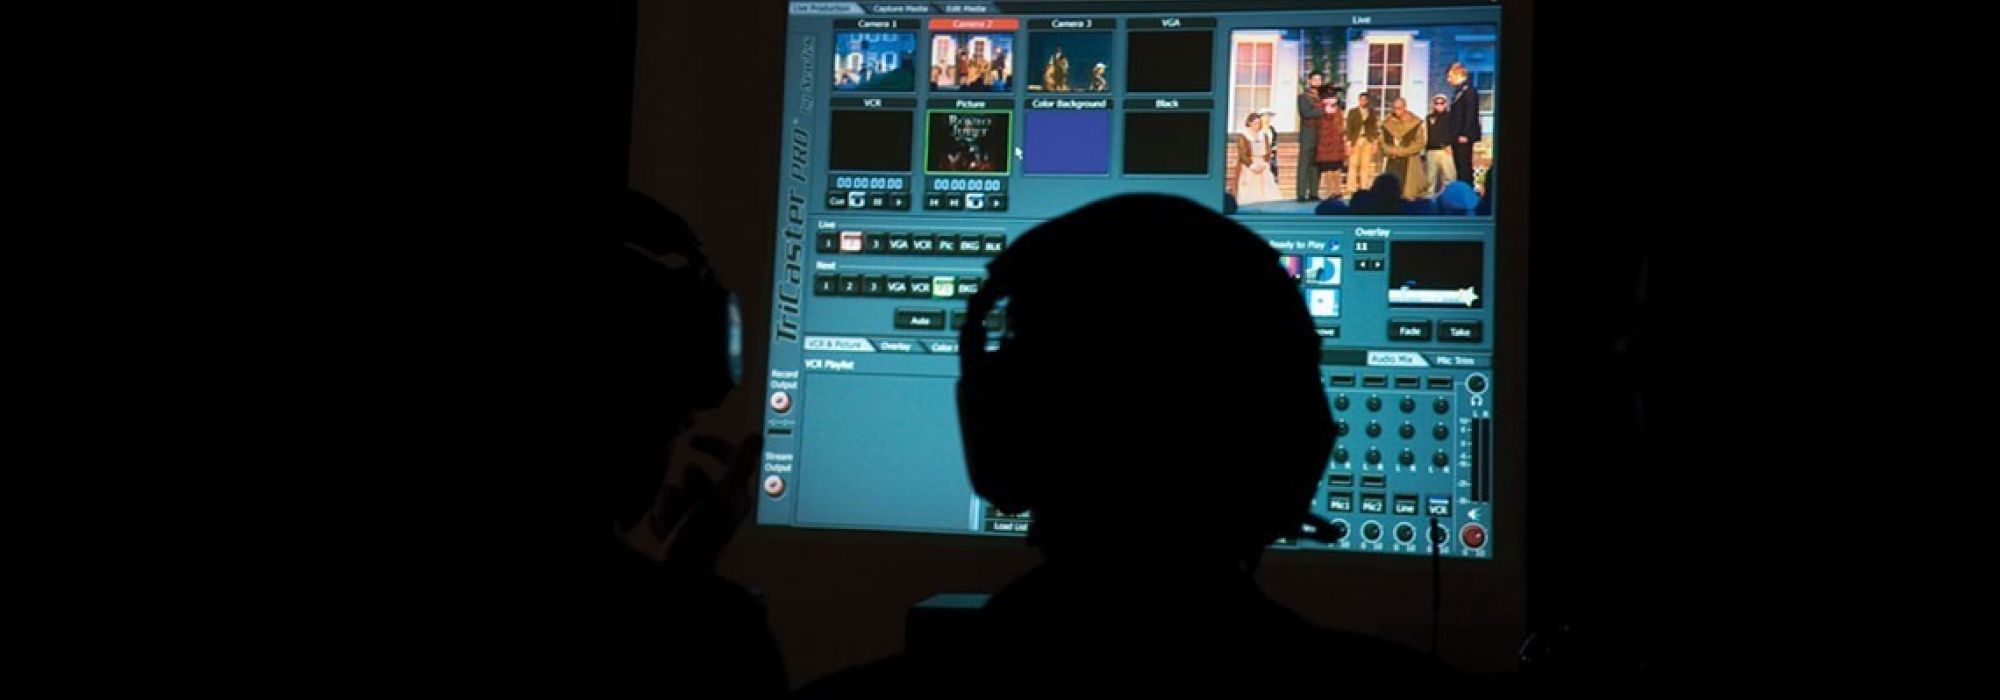 Two students in a control booth silhouetted in front of a monitor producing a live webcast of a theatre performance.